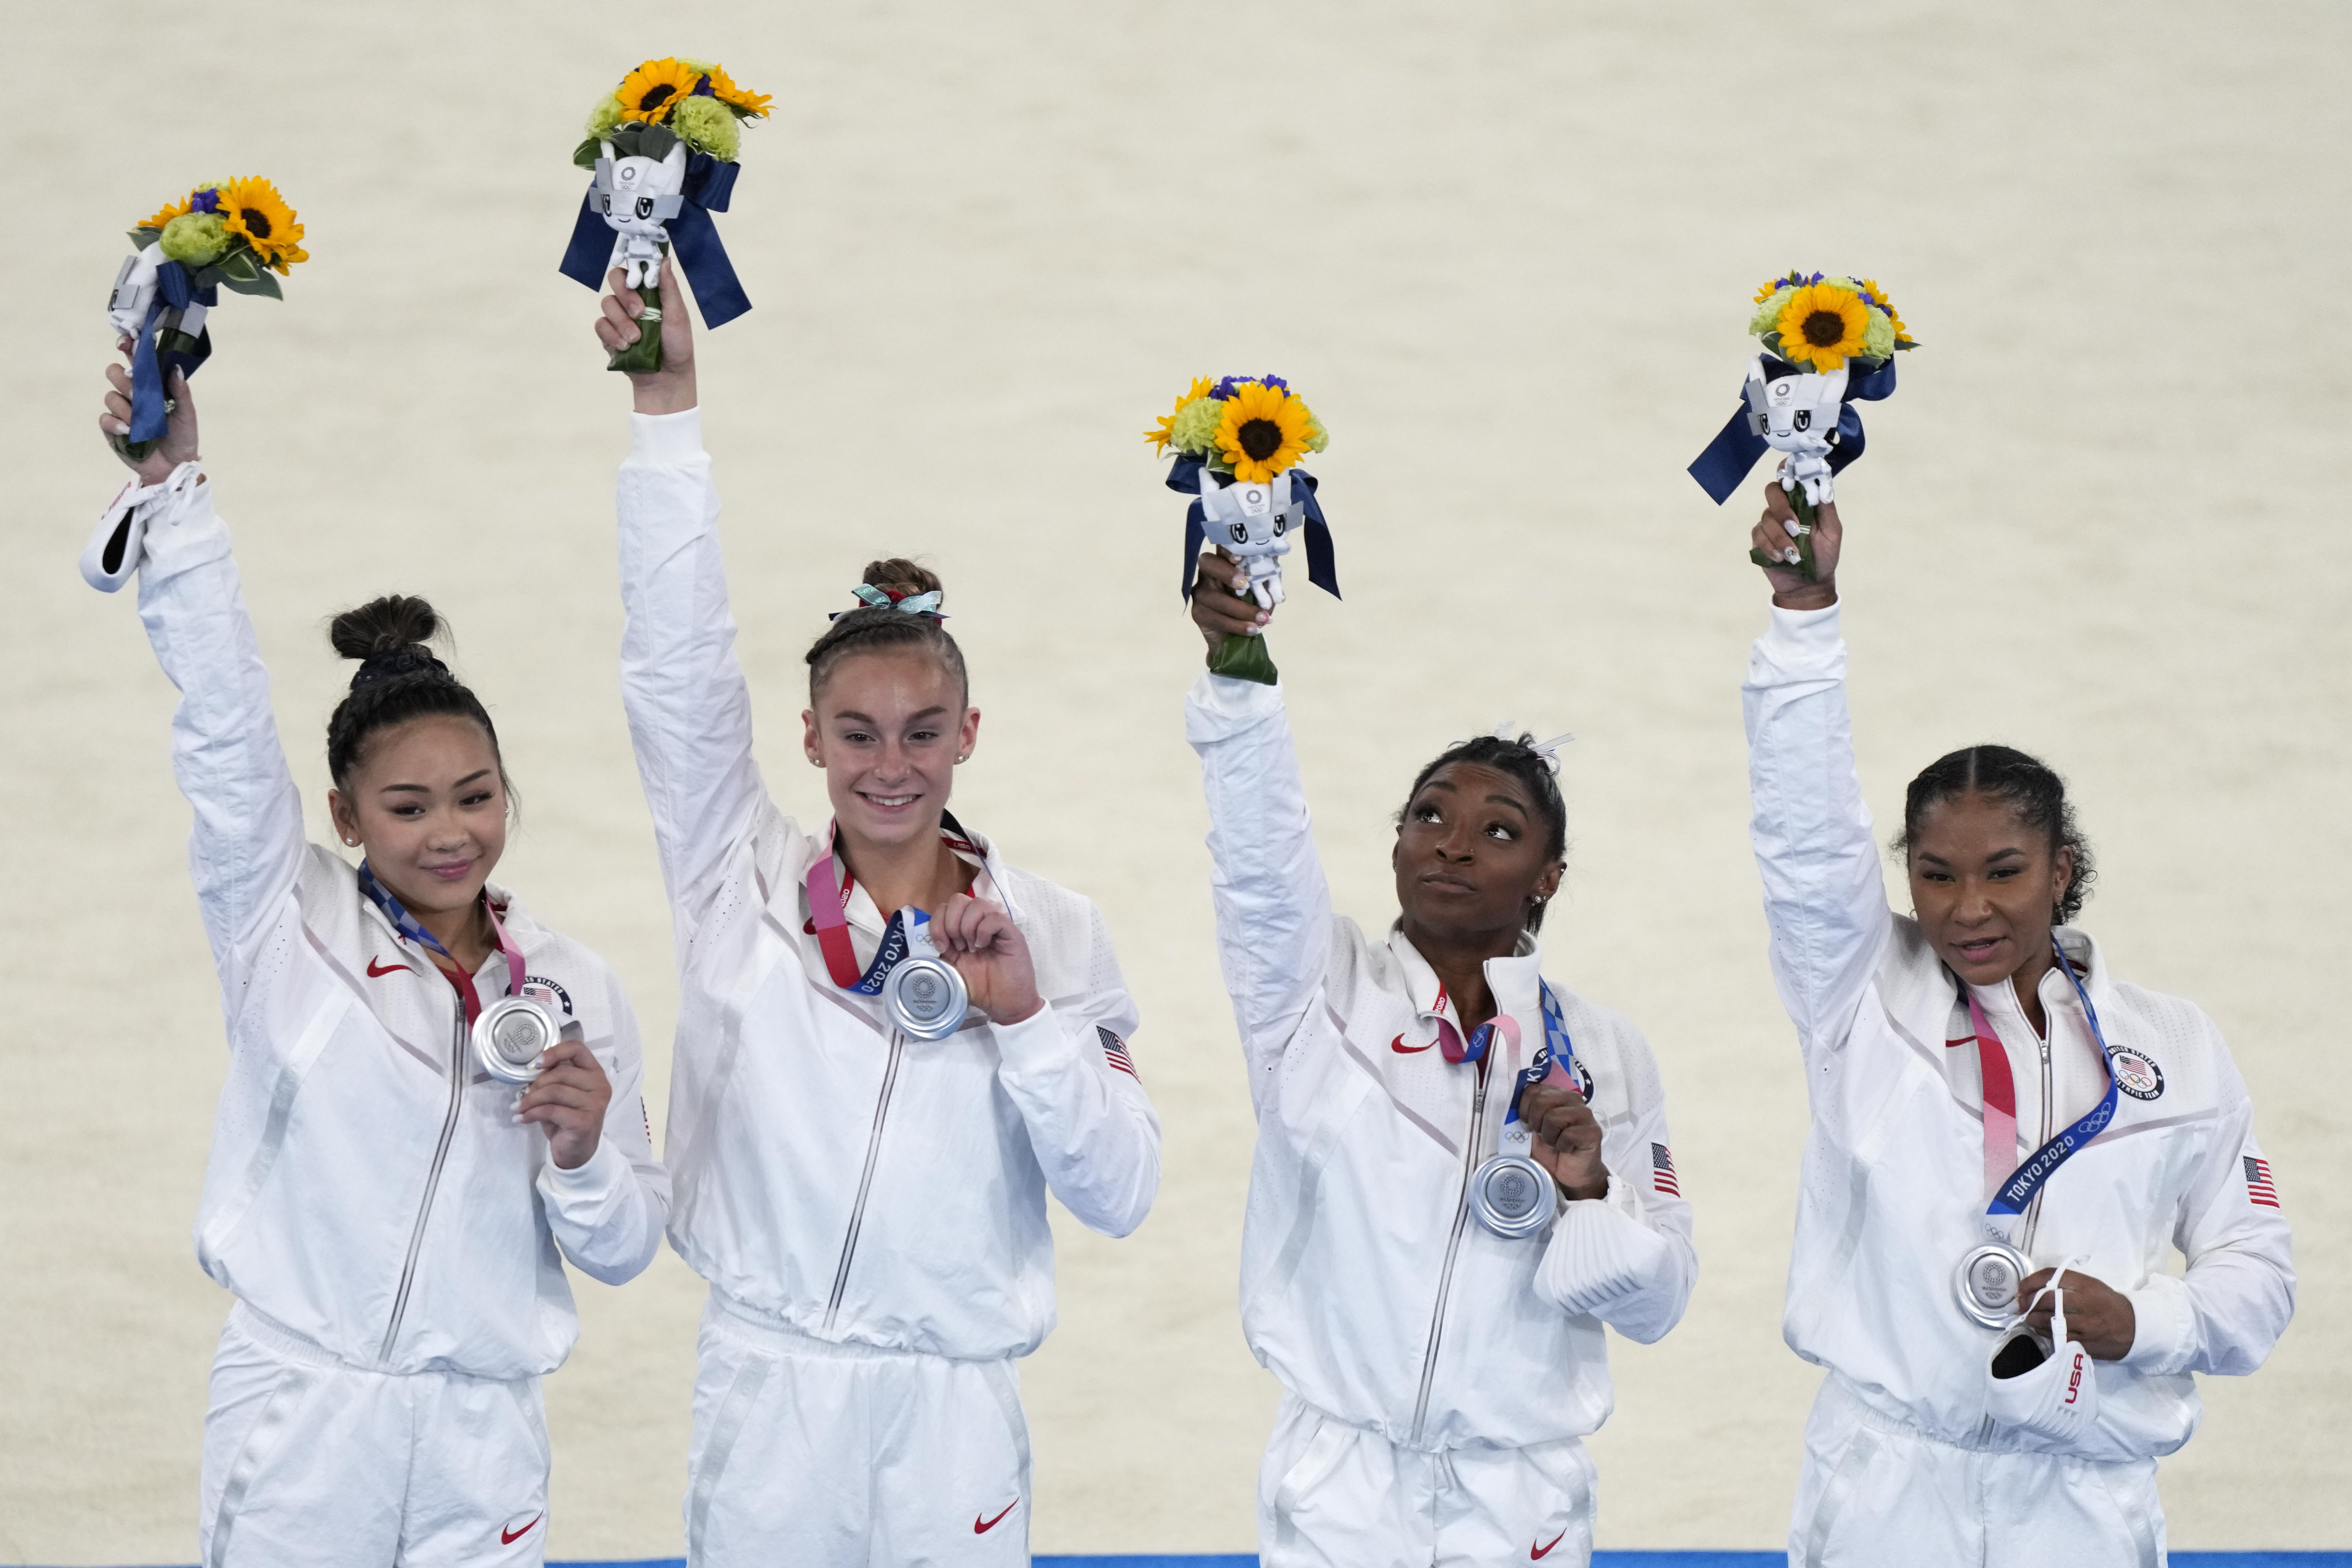 Simone Biles and Team USA ready to dazzle in women's team final